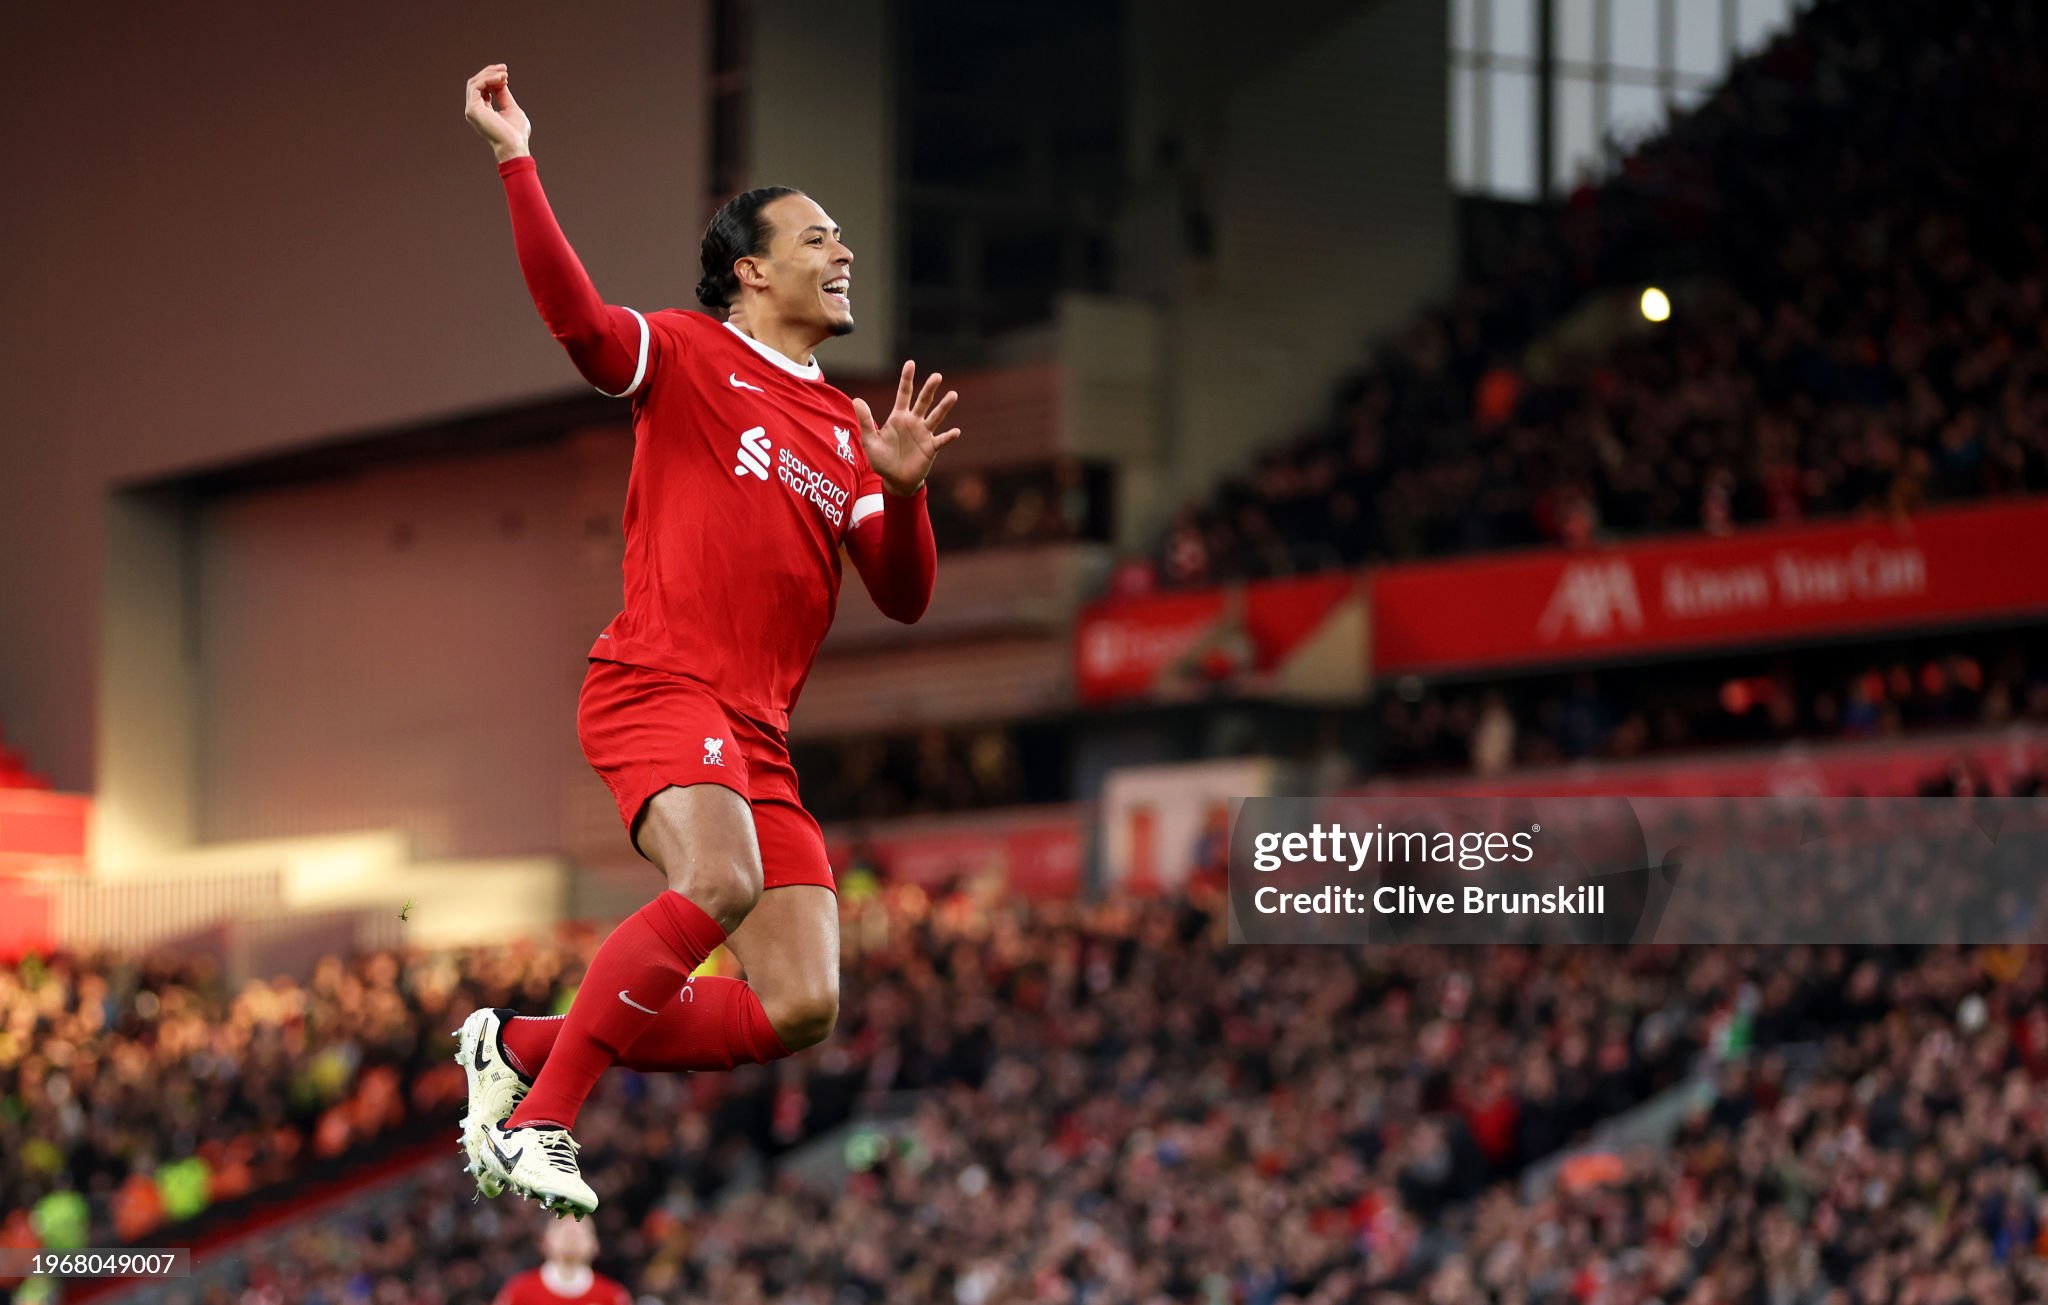 Van Dijk comes back on statements about the future: 'Taken out of context'